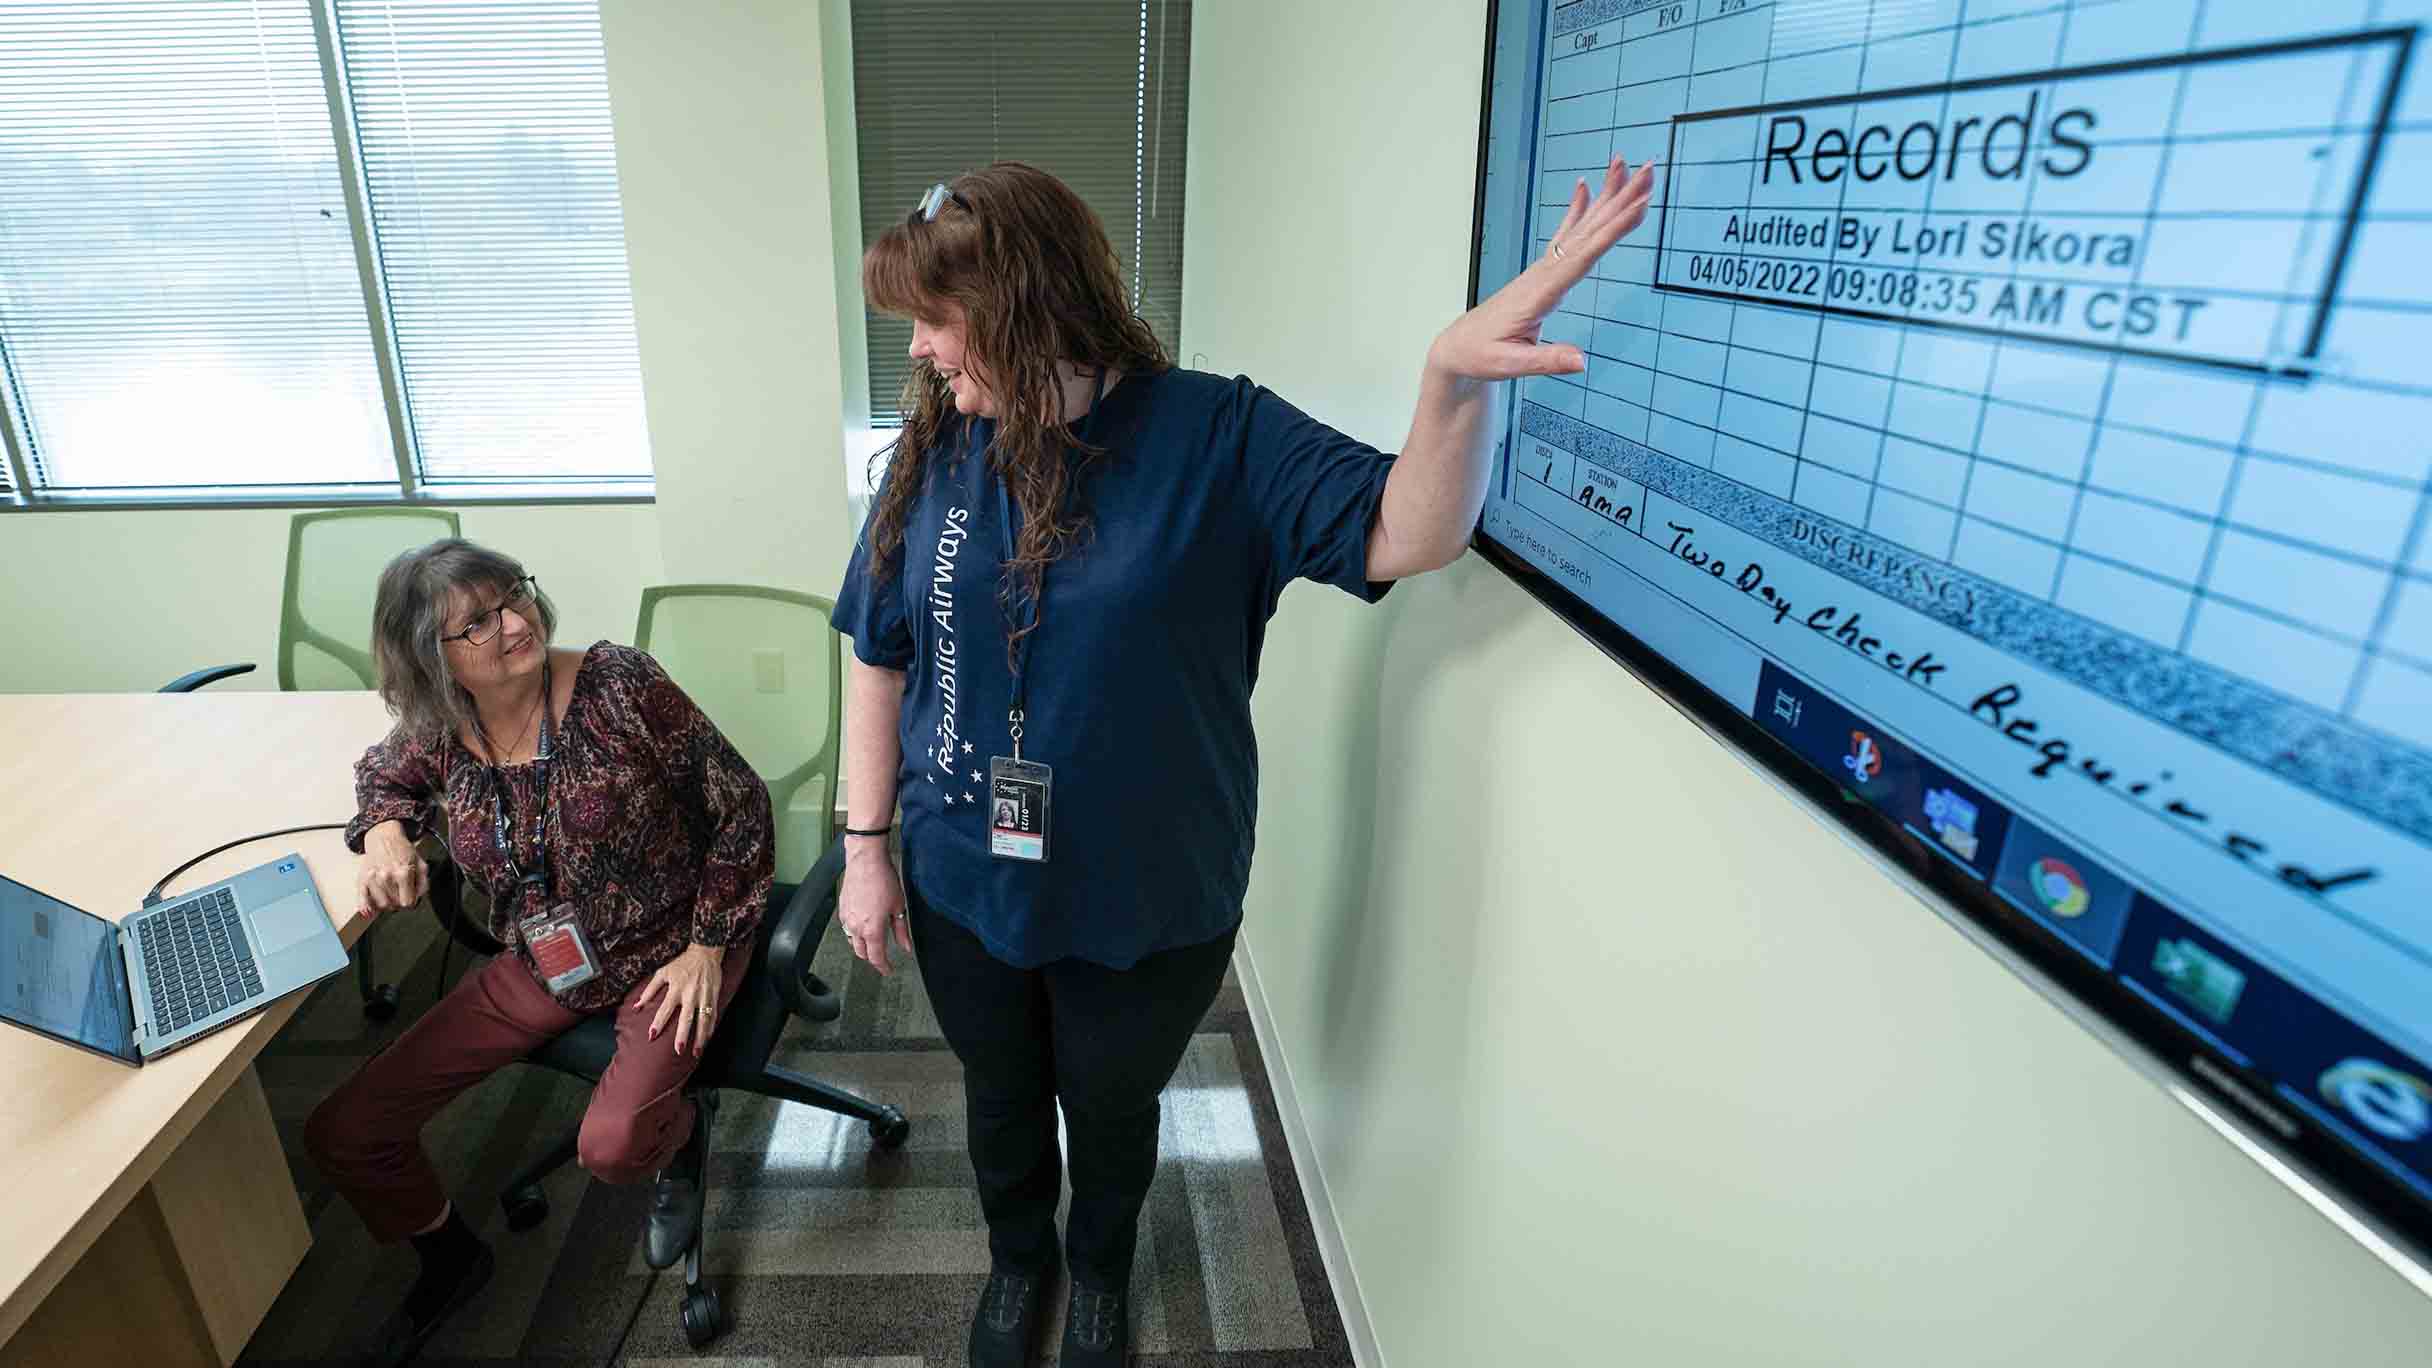 Republic Airways’ Lori Sikora and Peggy Malanoski show the GE Digital Stamp Annotation Tool in action. Image courtesy of Republic Airways